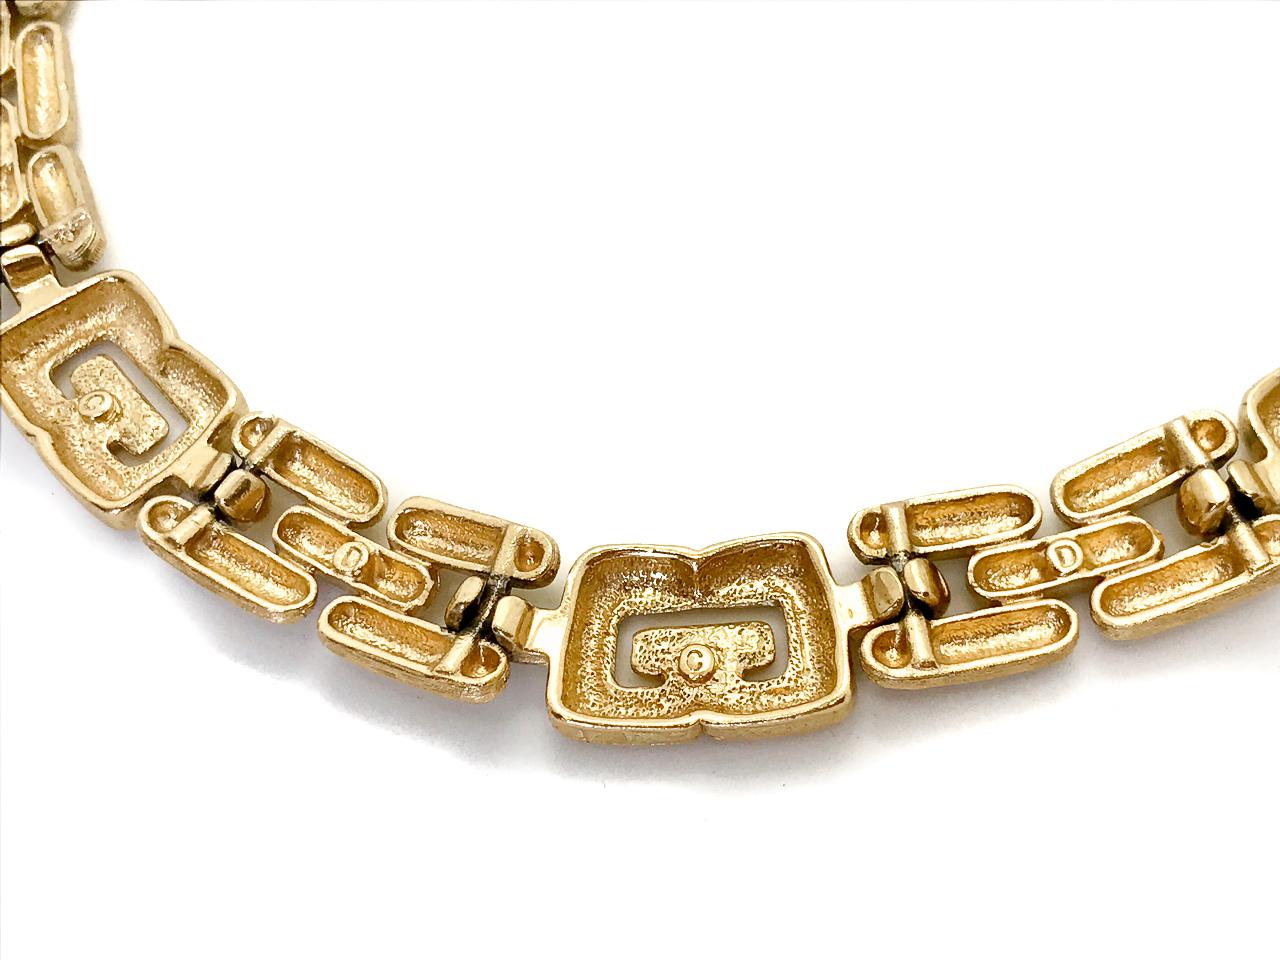 Givenchy 1980s Vintage Gold Plated 'G' Choker Collar Necklace 4